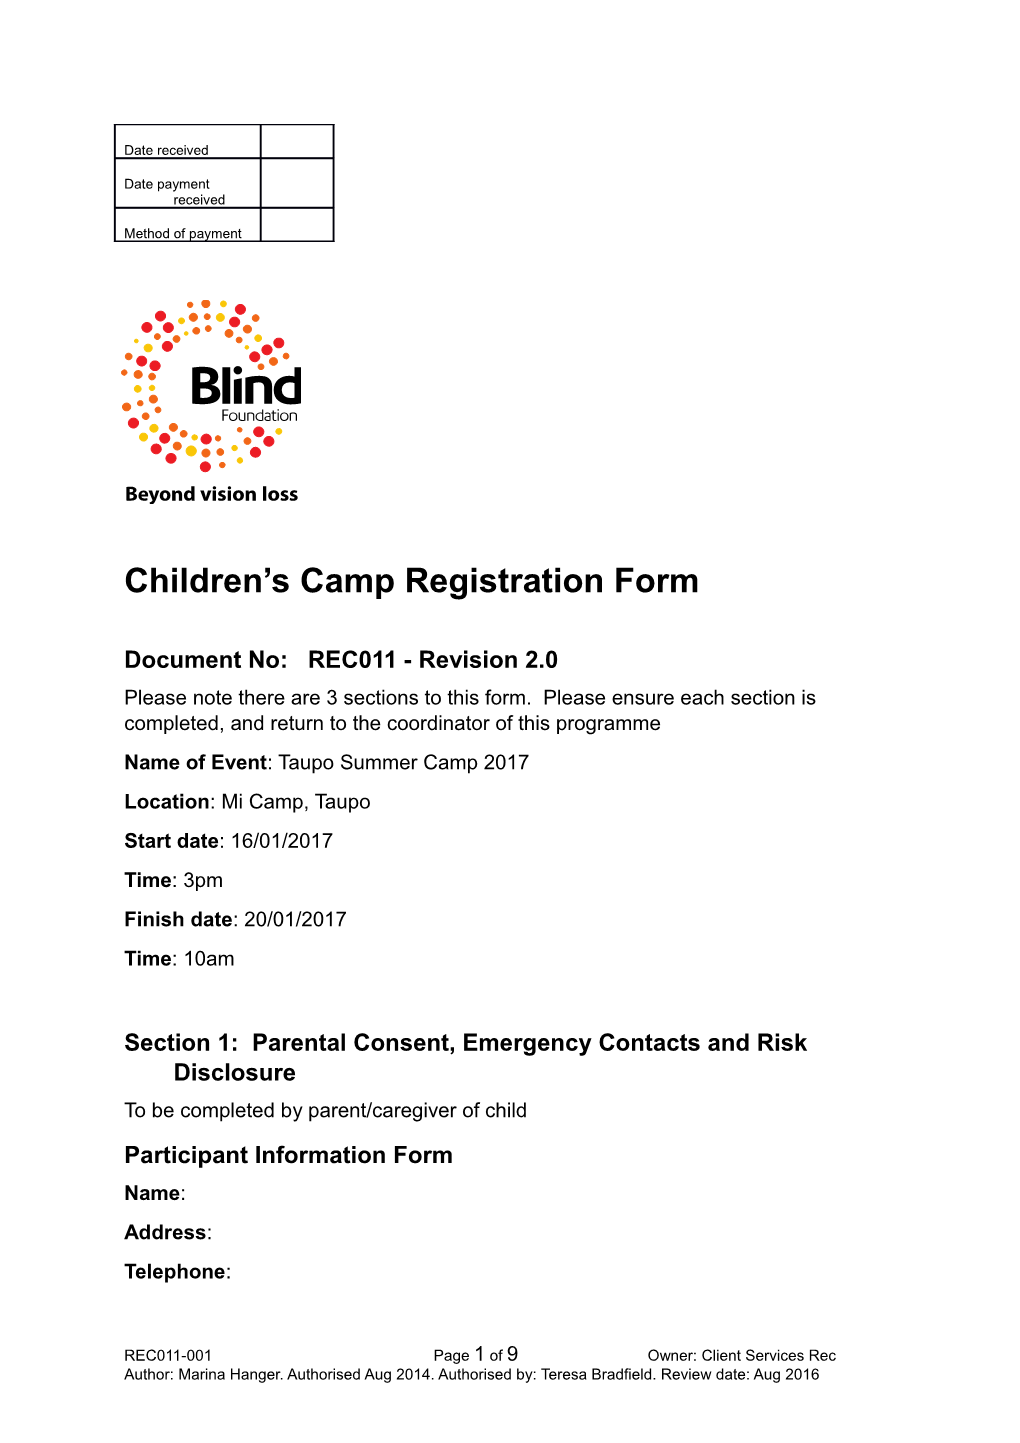 Draft Registration Form for Children S Camps Including Sections 1, 2 and 3